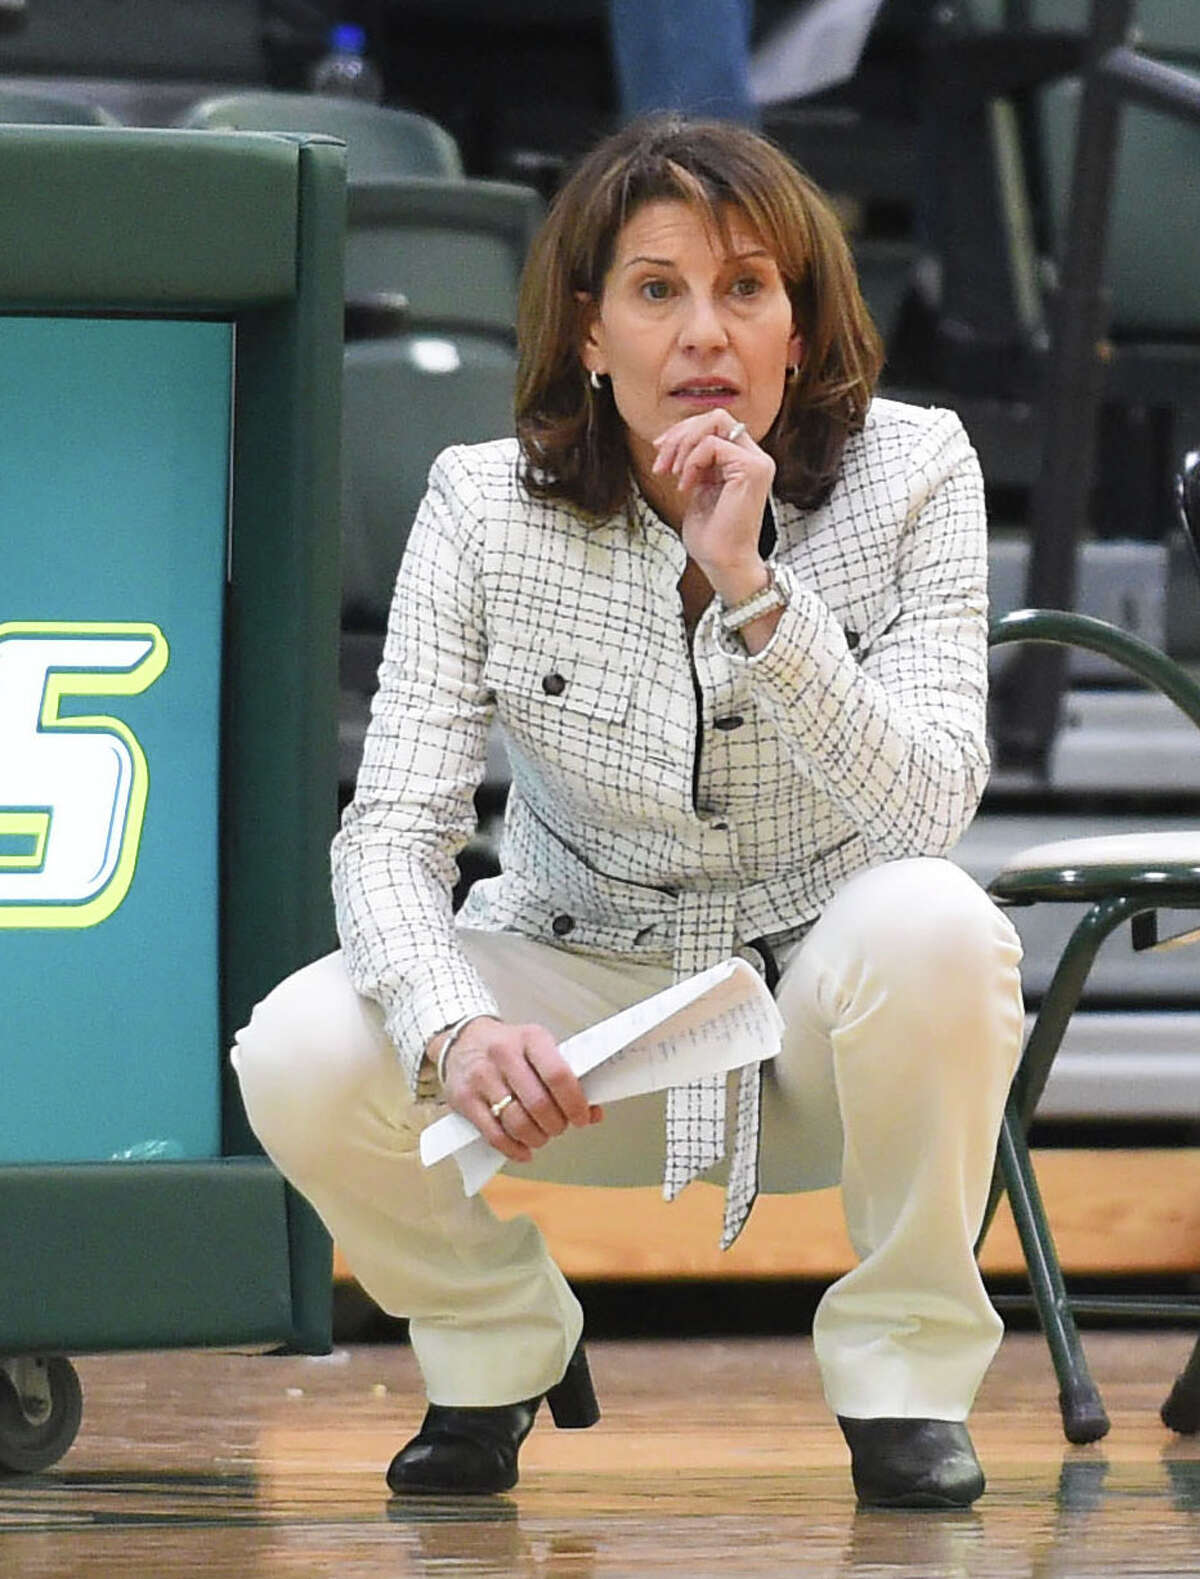 Gina Castelli will join the UAlbany women's basketball staff under head coach Colleen Mullen.In 2019, in her 6th season at Le Moyne, she relied on a trio of Capital Region players in this, her best season, at the Division II level. Her team won the Northeast-10 Conference Championship Sunday and played in the NCAA Championship starting Friday March 15, 2019.